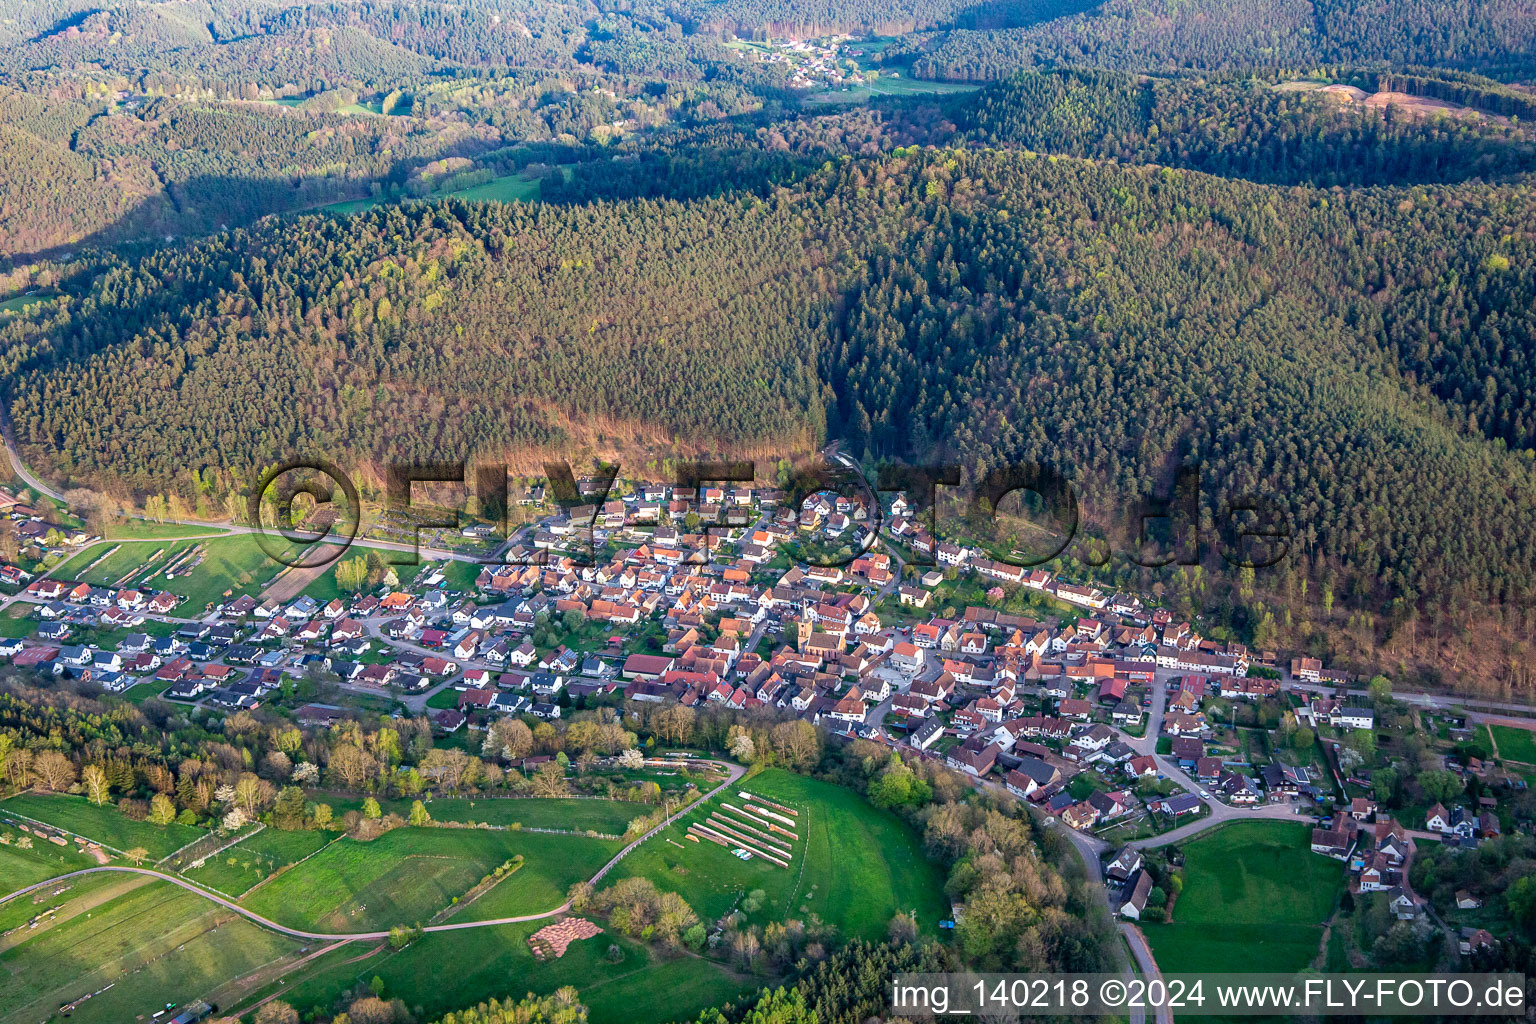 From northwest in Vorderweidenthal in the state Rhineland-Palatinate, Germany